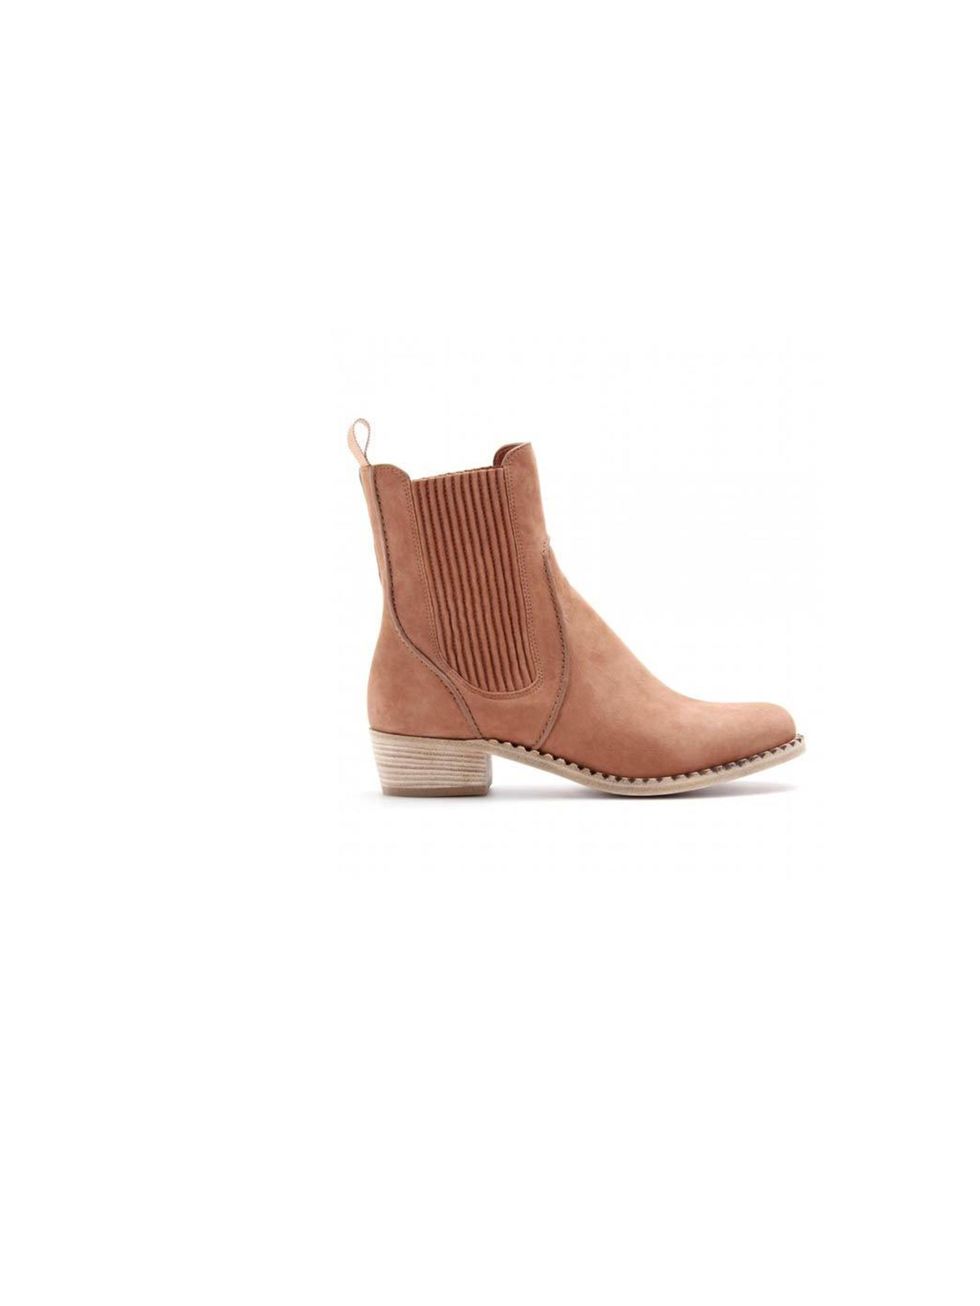 <p>A great pair of tan ankle boots is a festival staple; they look great with bare legs or jeans and are comfy enough to wear all day...and night! Marc by Marc Jacobs suede boots, £359 at <a href="http://www.mytheresa.com/en-gb/clippy-suede-chelsea-boots-